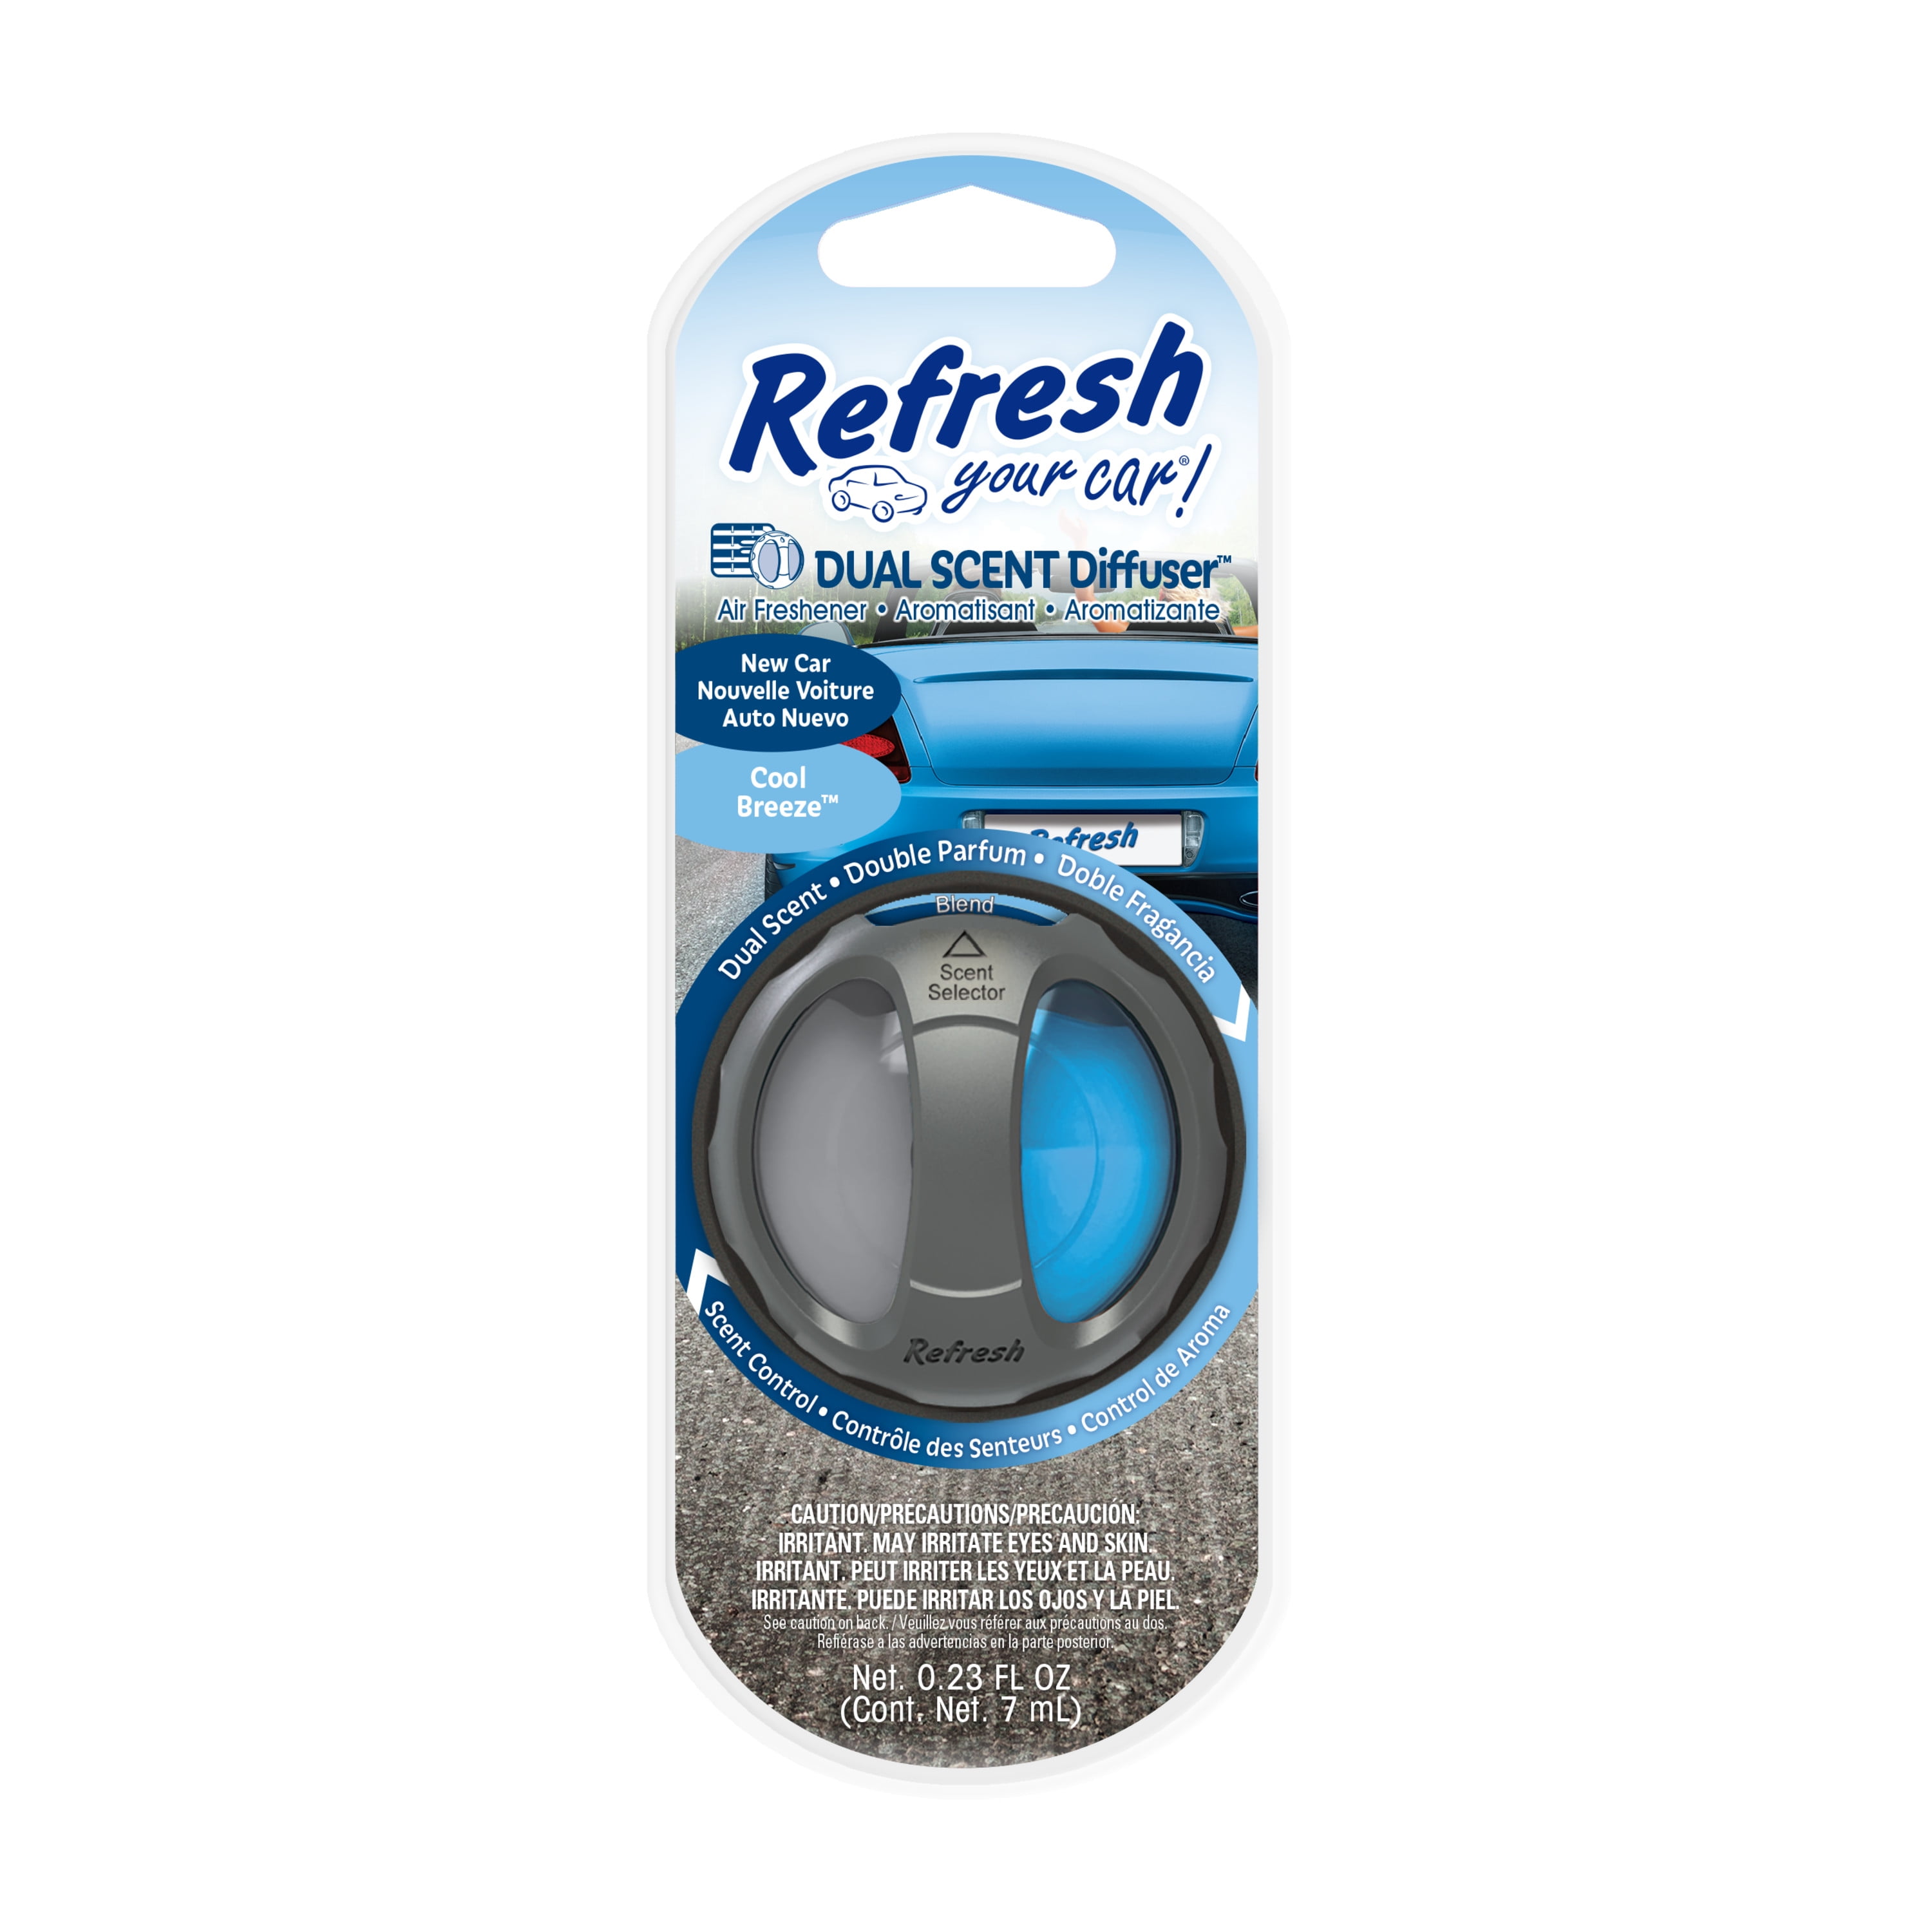 All Year Freshness  Stylish Car Air Fresheners with Long-Lasting Scents